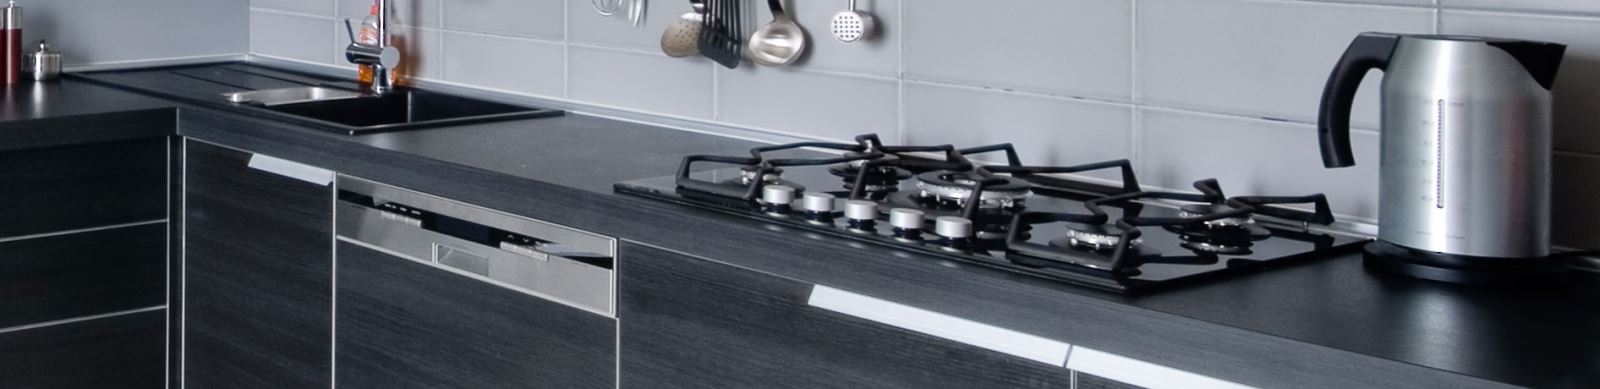 Repair Ovens, Stoves, Cookers and Microwaves